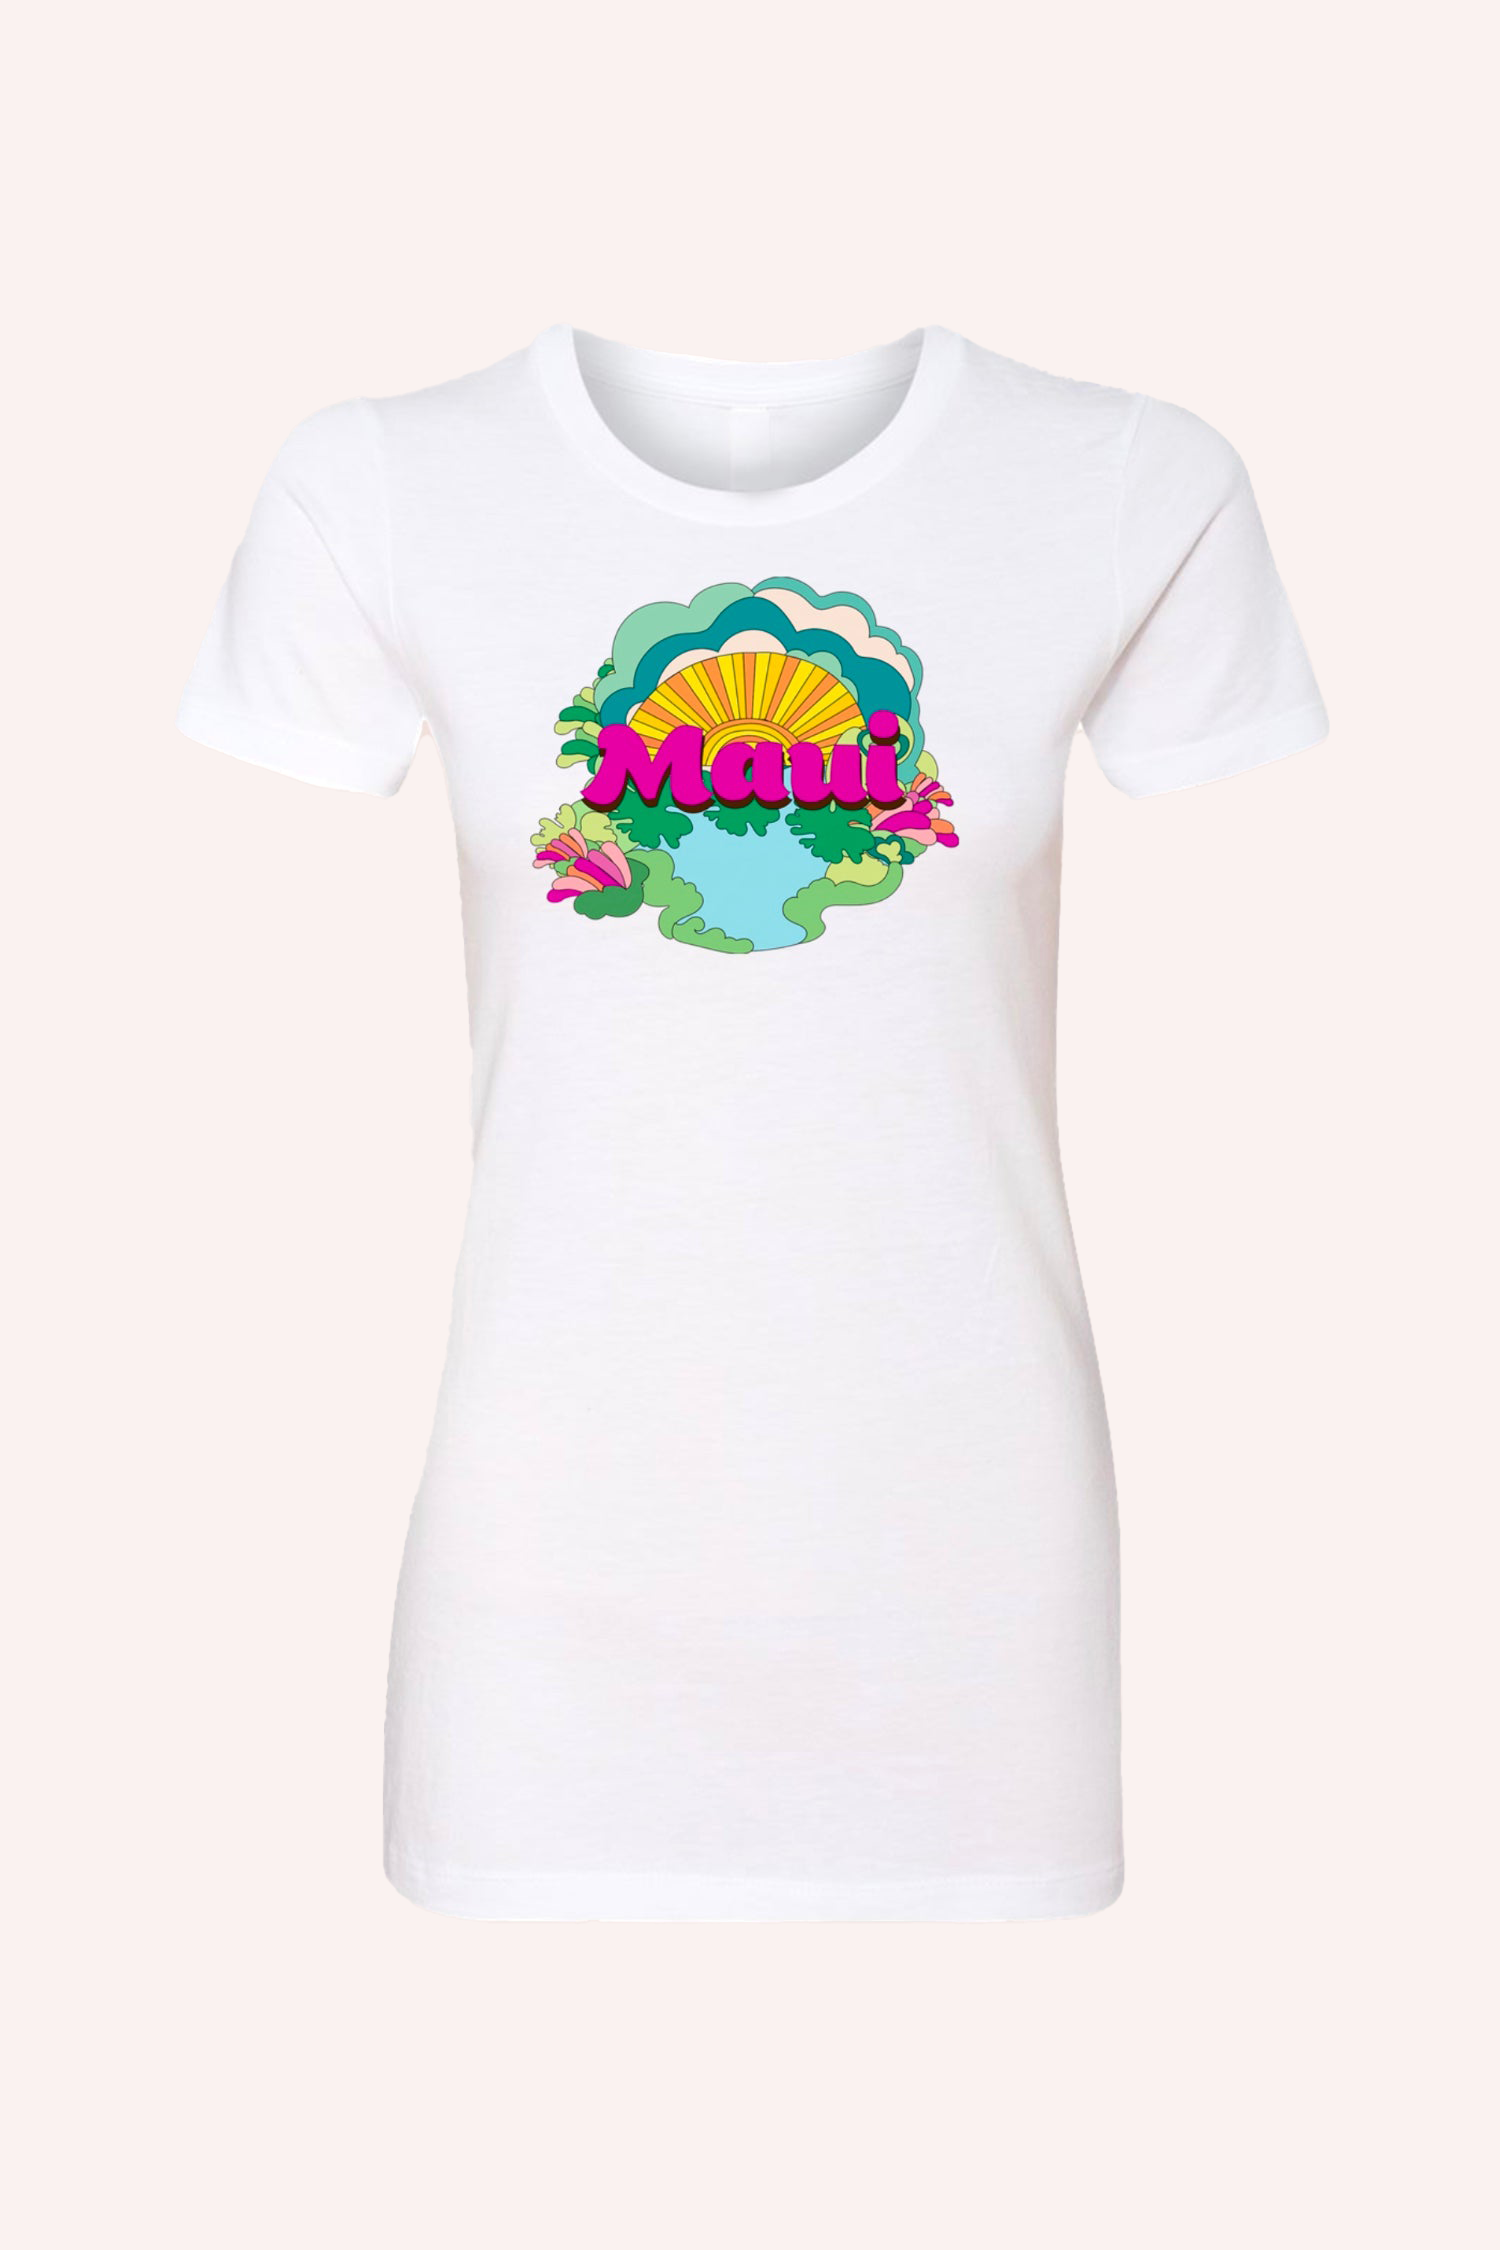 Fitted Maui Tee, white, short sleeves, round collar, print on the bust MAUI and a Hawaiian design